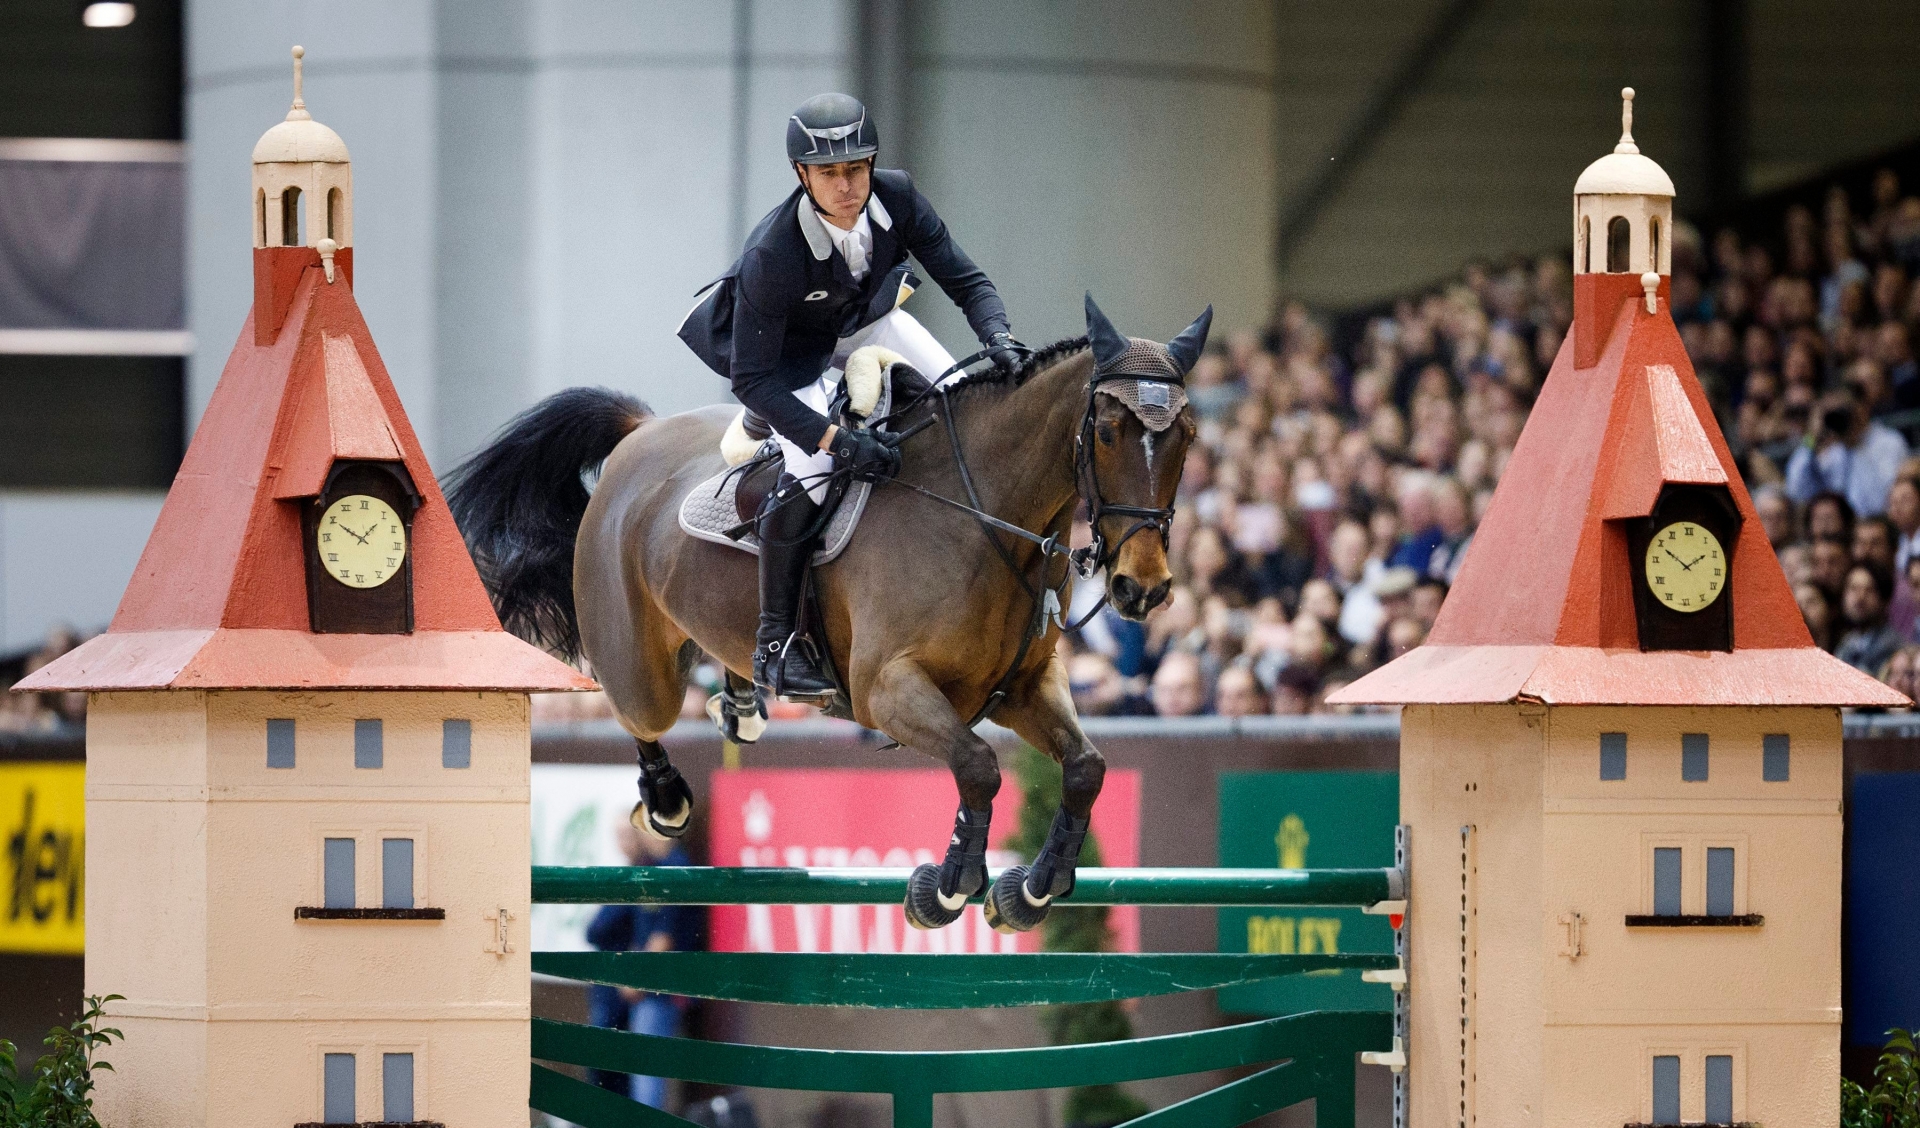 Steve Guerdat from Switzerland rides his horse Nino des Buissonnets to win the first place of the Rolex Grand Prix of show jumping at the 55th CHI international horse show jumping tournament in Geneva, Switzerland, on Sunday, December 13, 2015. (KEYSTONE/Valentin Flauraud) SWITZERLAND CHI GENEVA